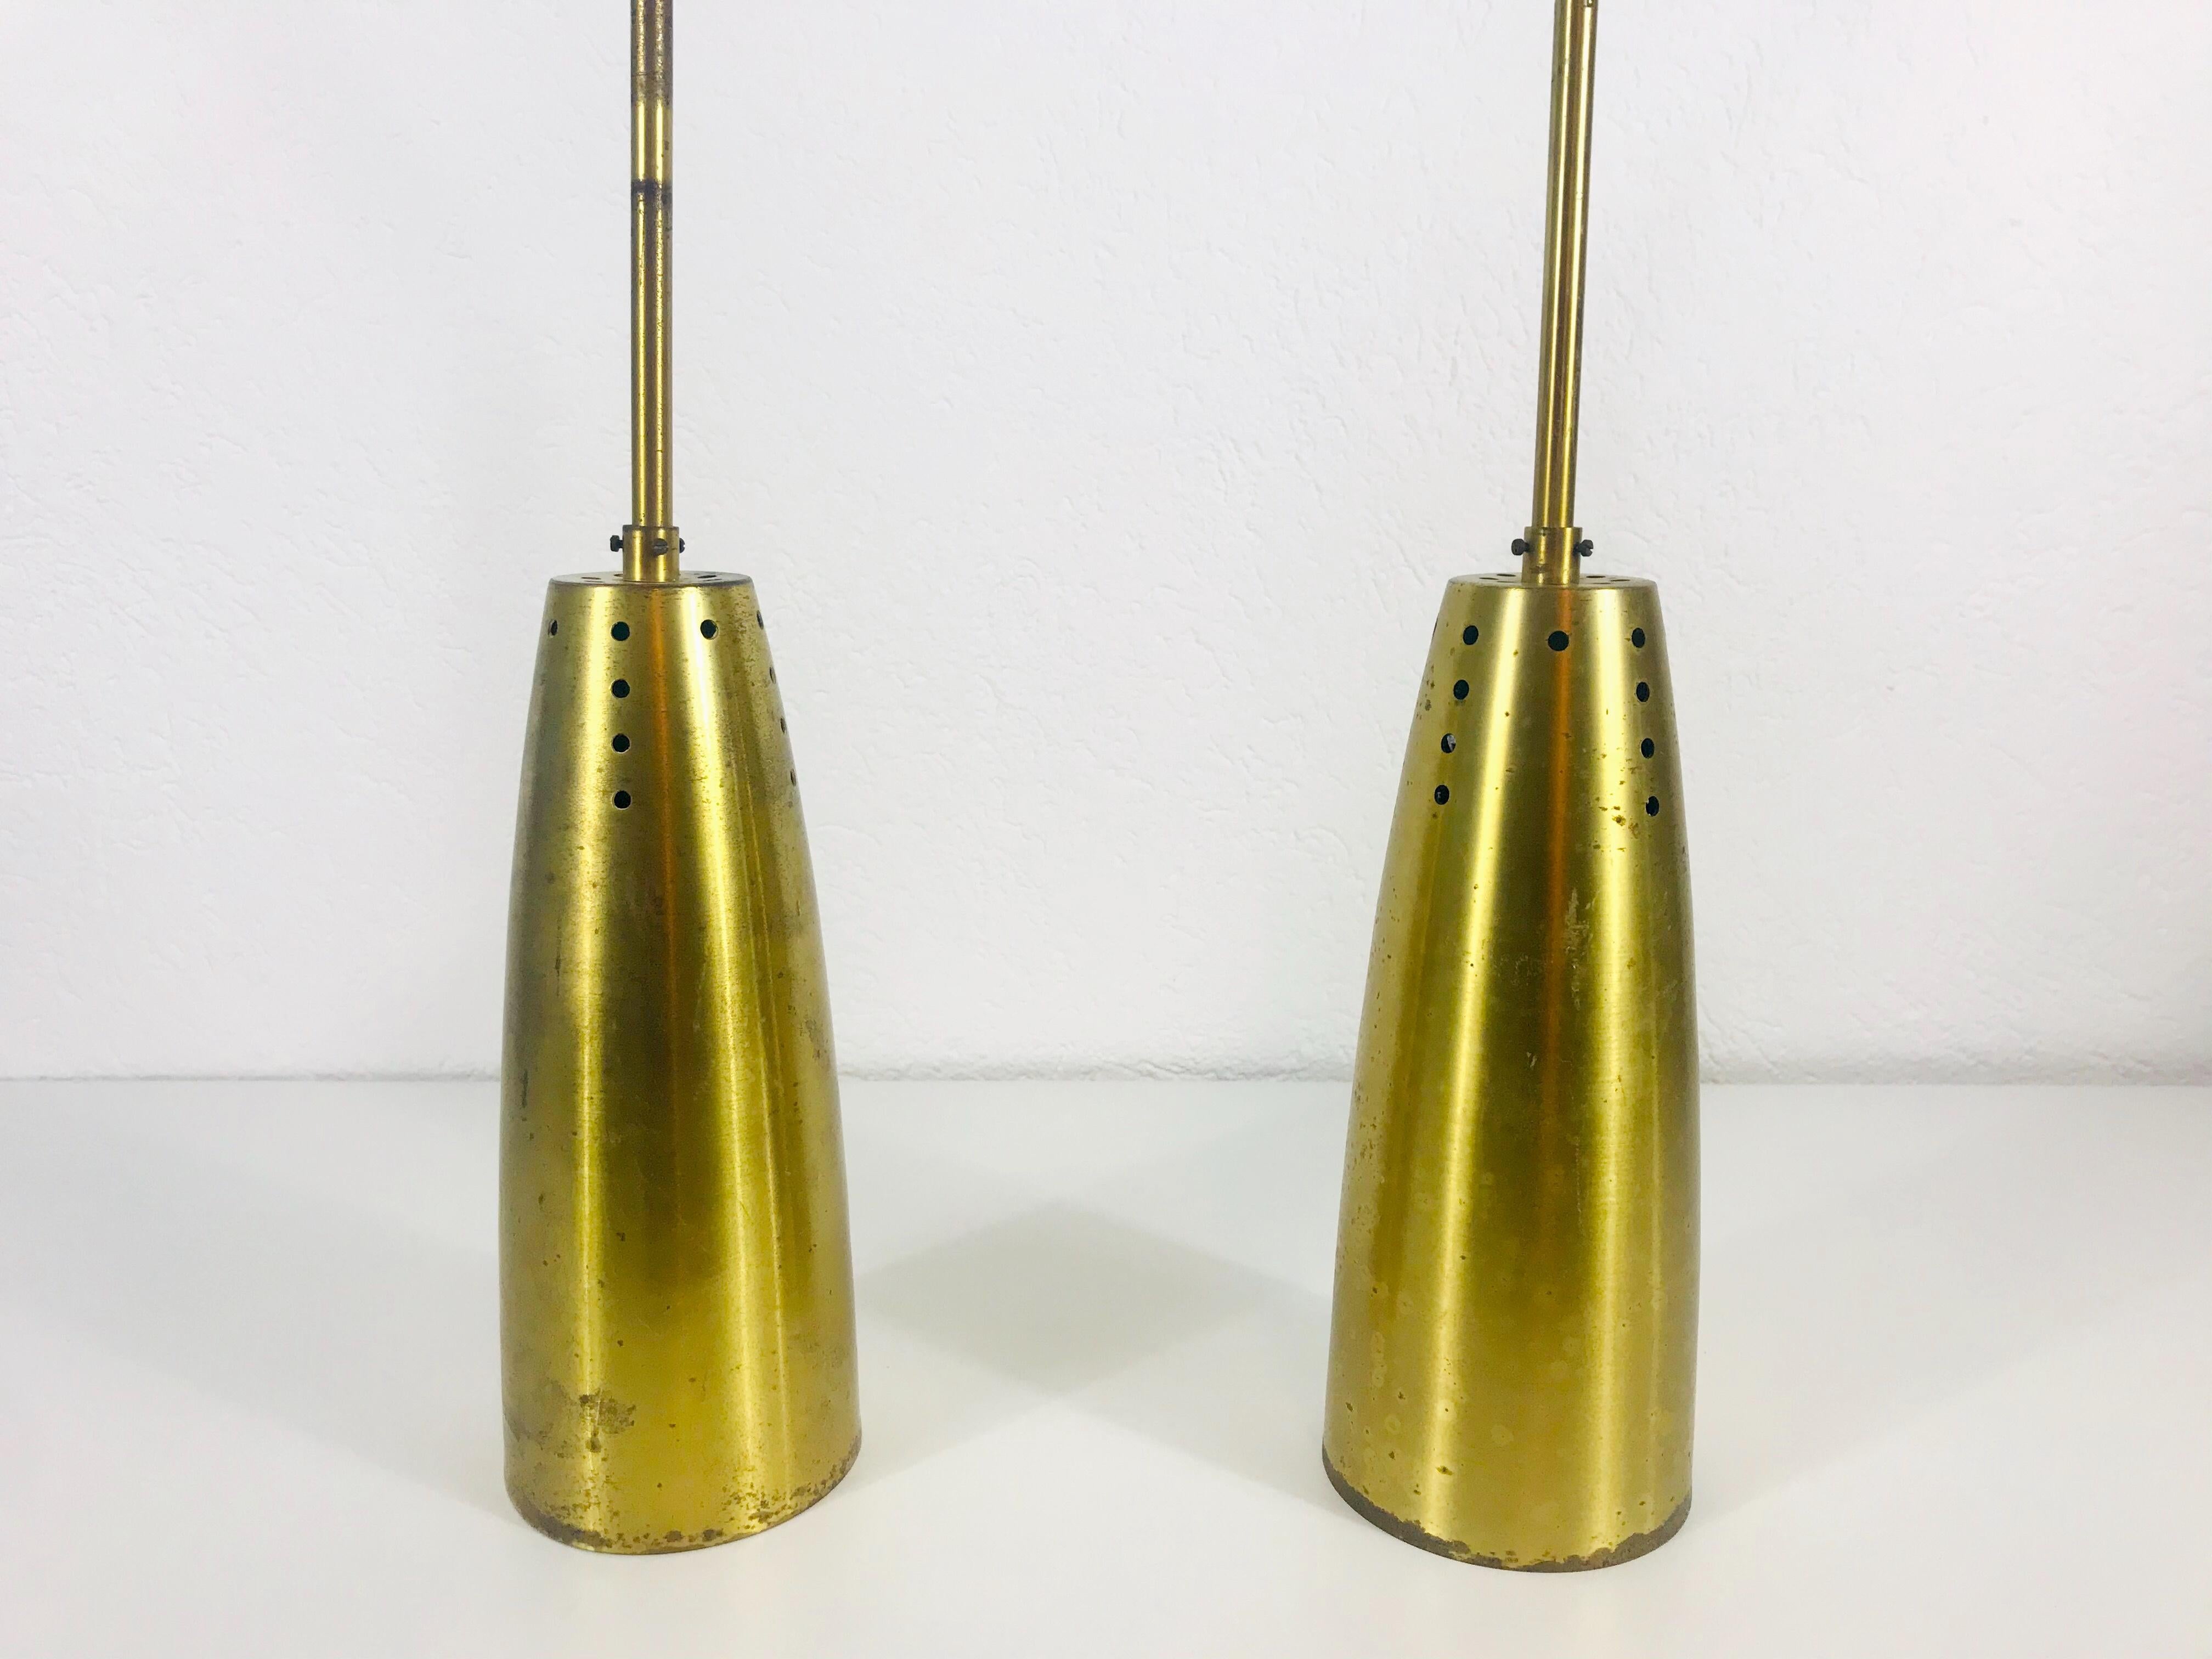 Pair of very rare pendant lamps made in Germany in the 1950s. The lighting is made of brass and has the style of the Italian brand Stilnovo. It has many small holes which are creating beautiful light. The lighting requires one E27 light